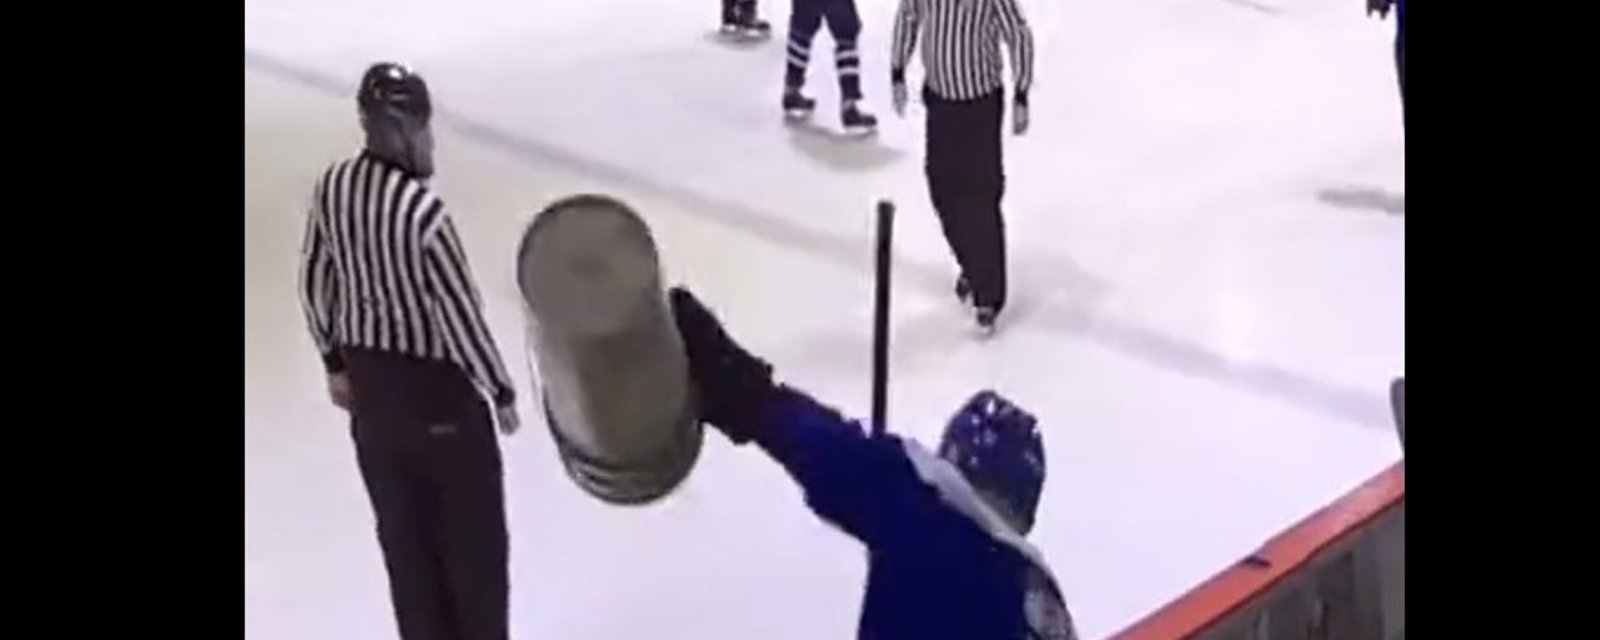 Beer leaguer throws a temper tantrum, chucks pucks on the ice in protest